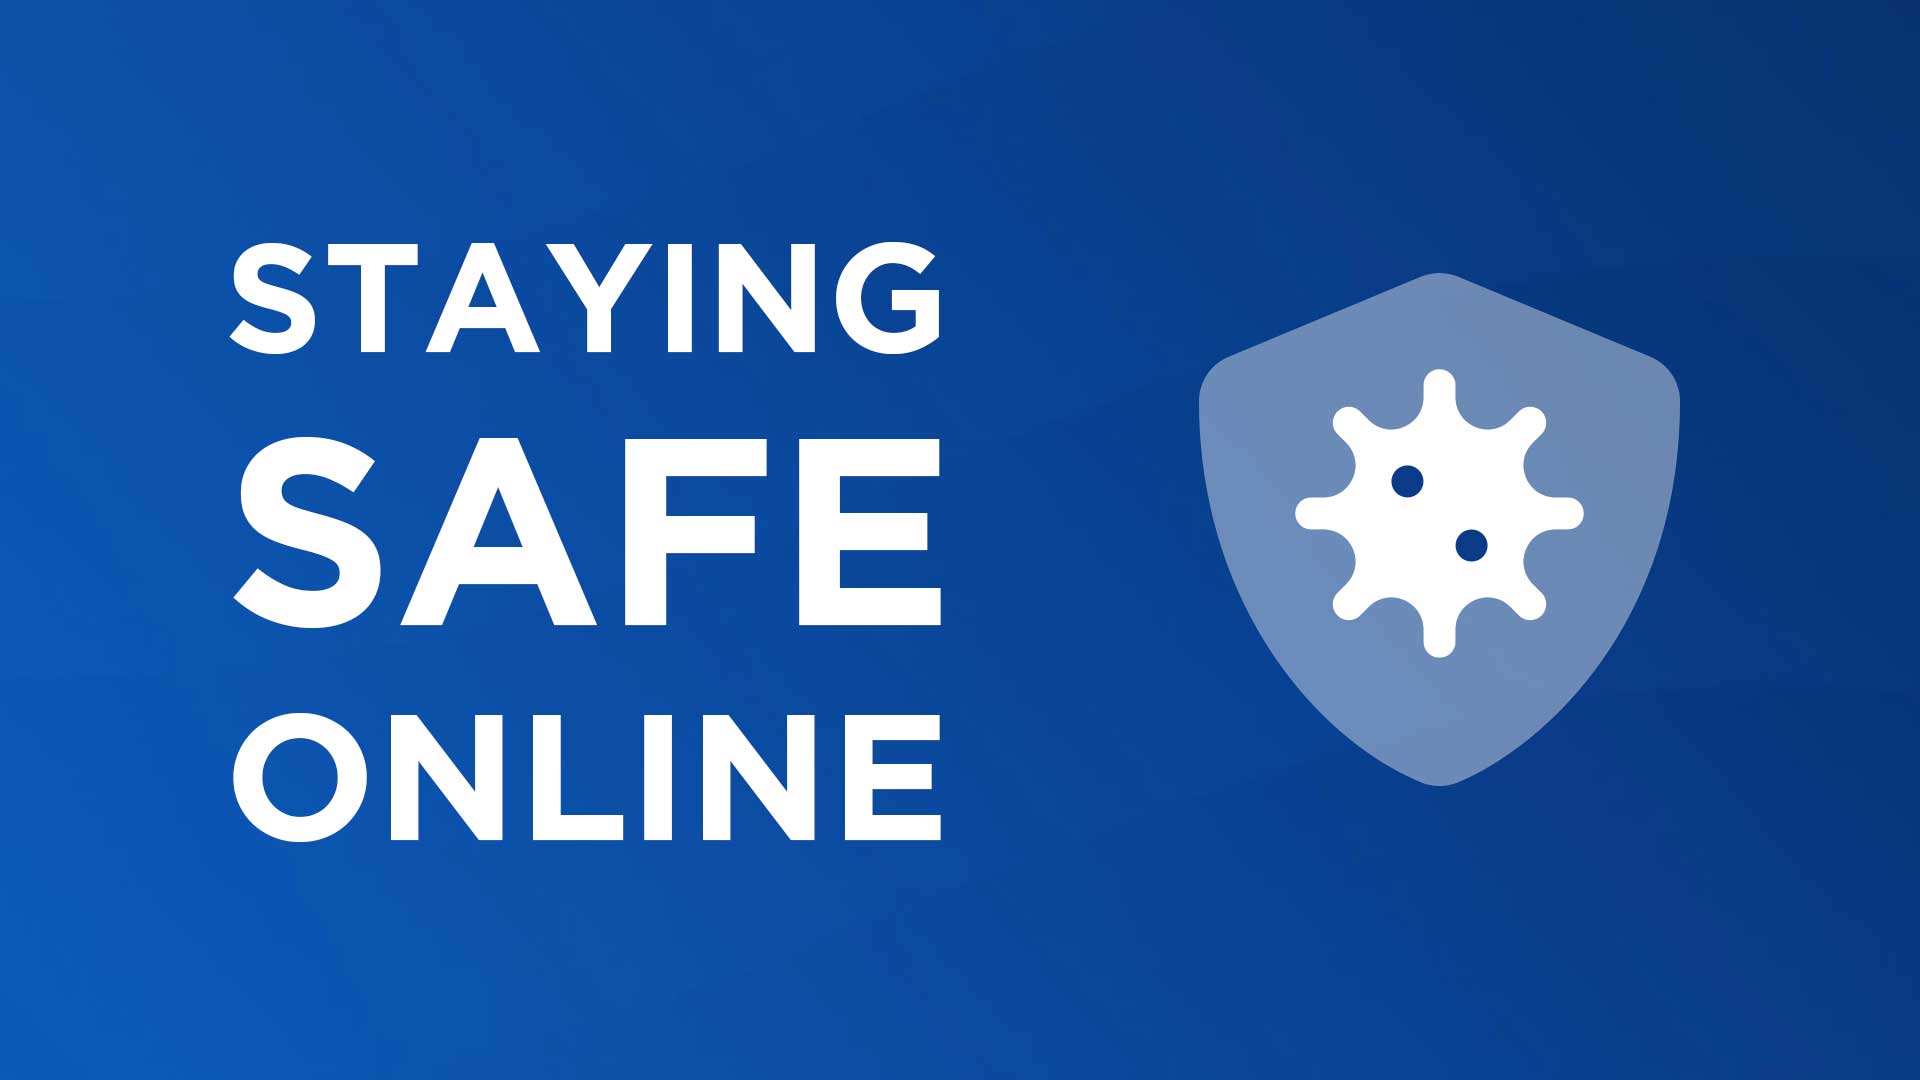 How can I stay safe online?